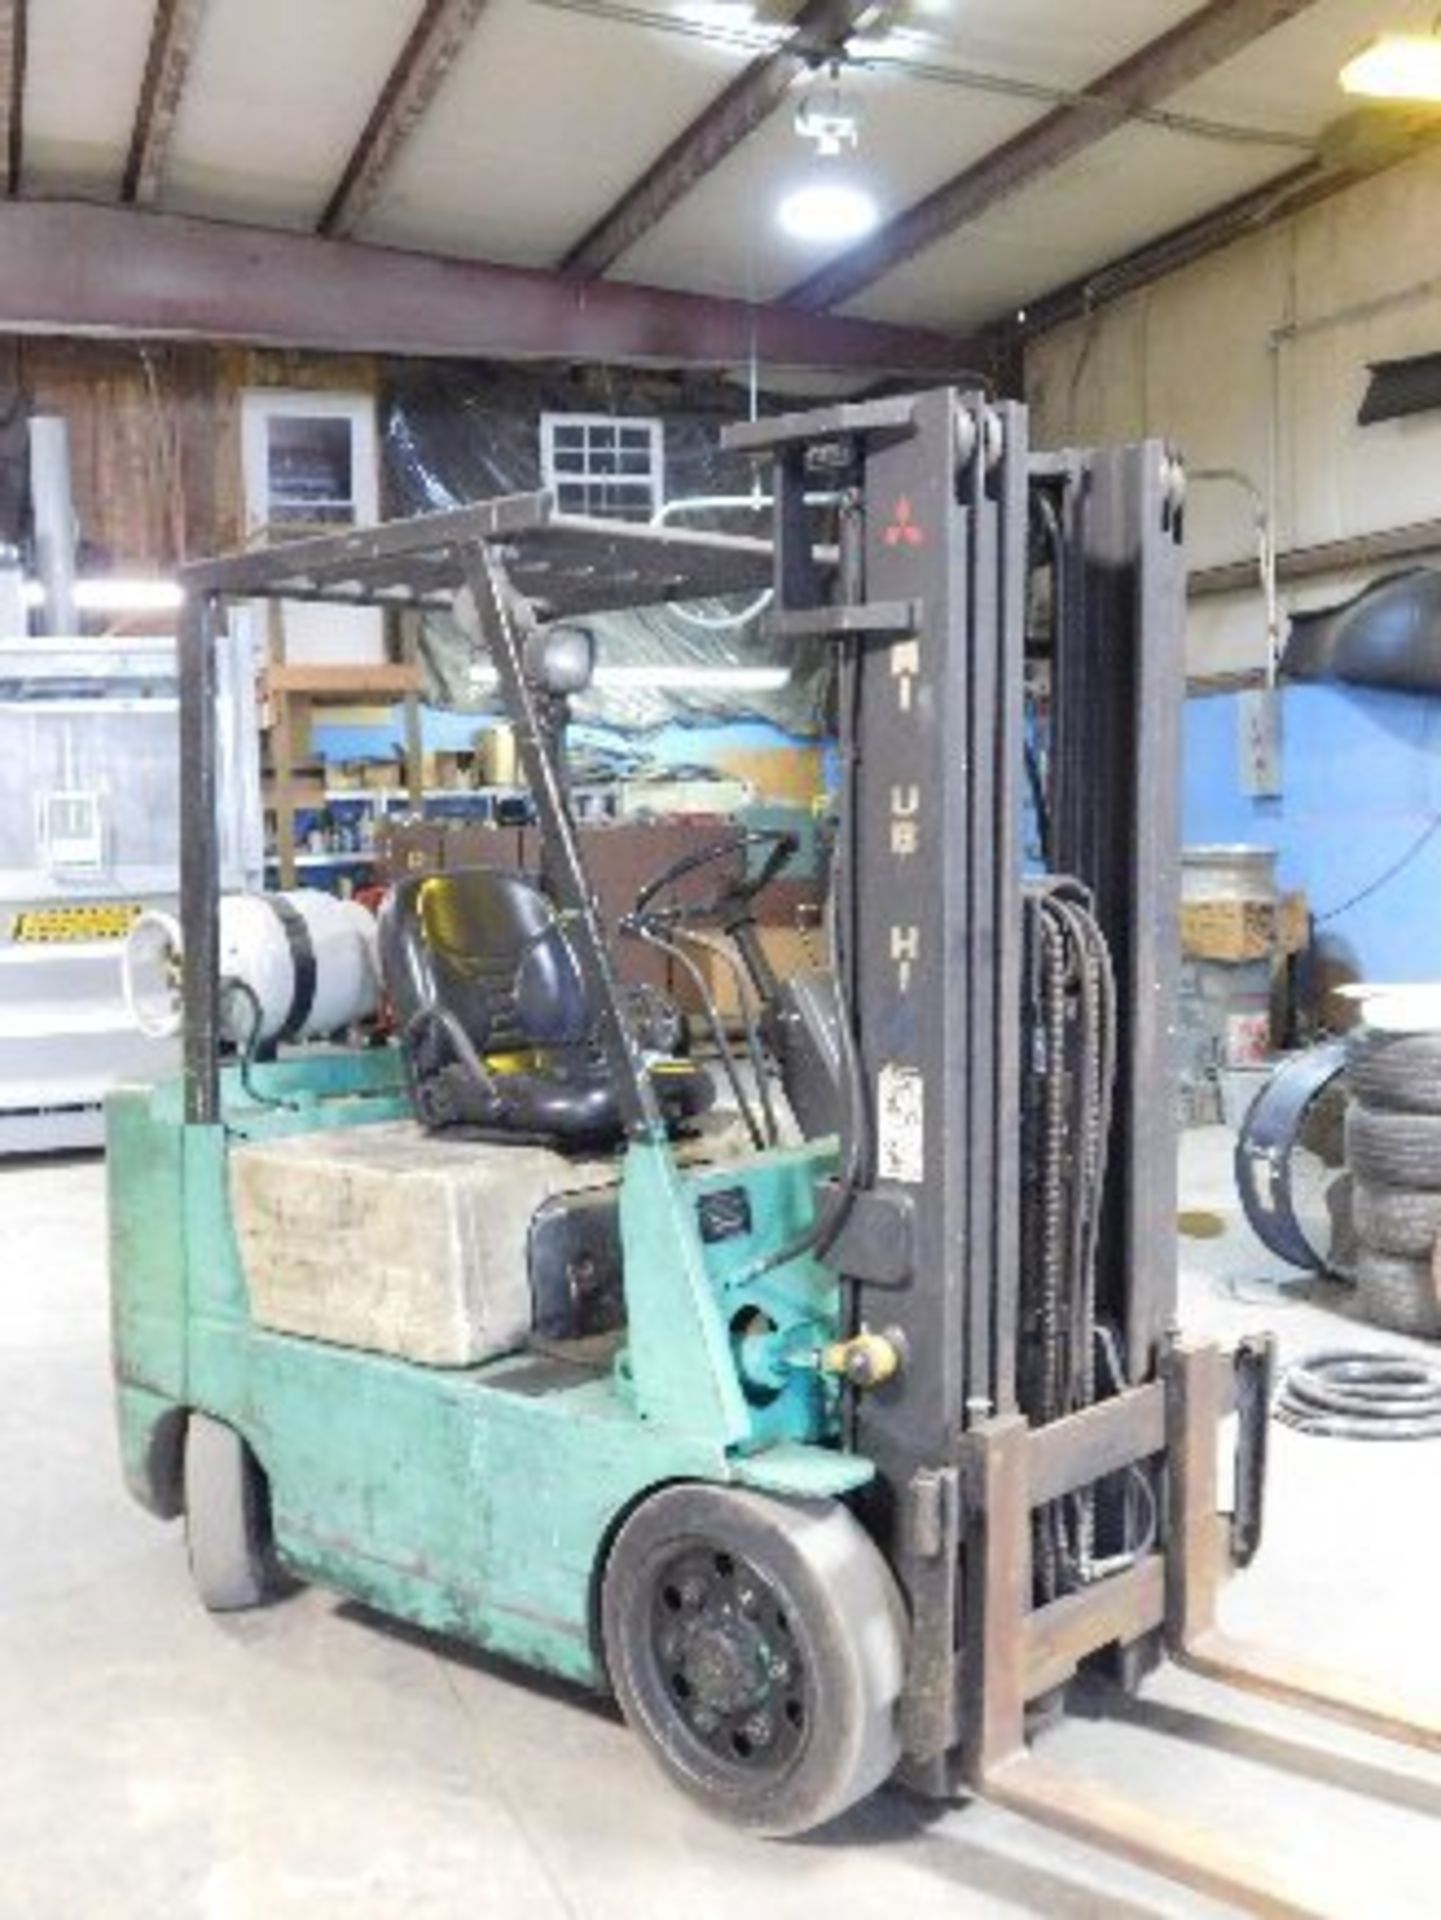 Mitsubishi FGC25 Forklift, 5,000lb. 139" Lift Height, LP Gas, 3 Stage Mast, solid tires - THIS - Image 3 of 3